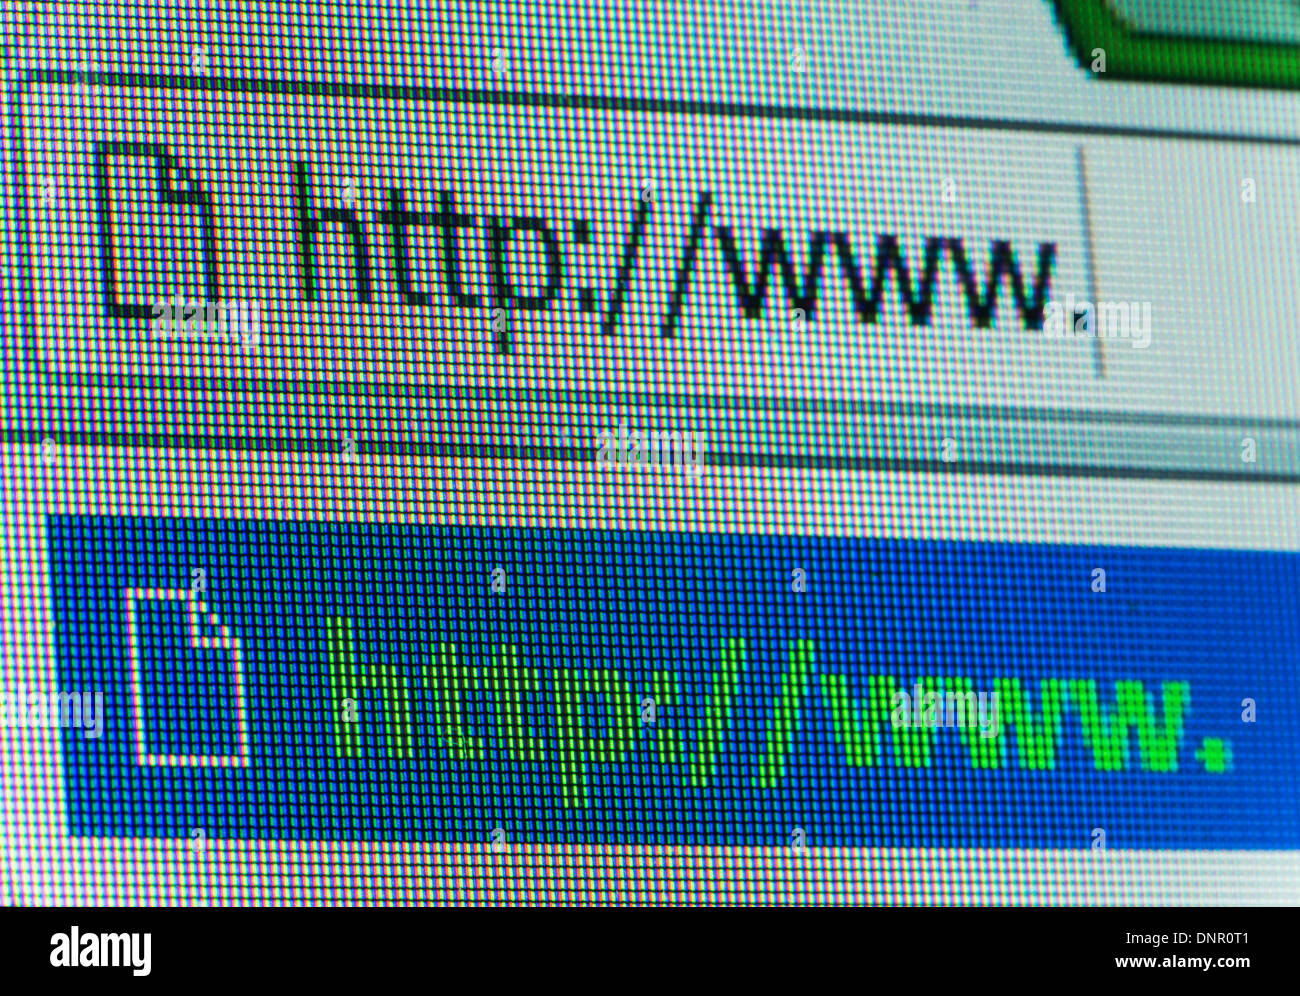 Internet browser close up Stock Photo